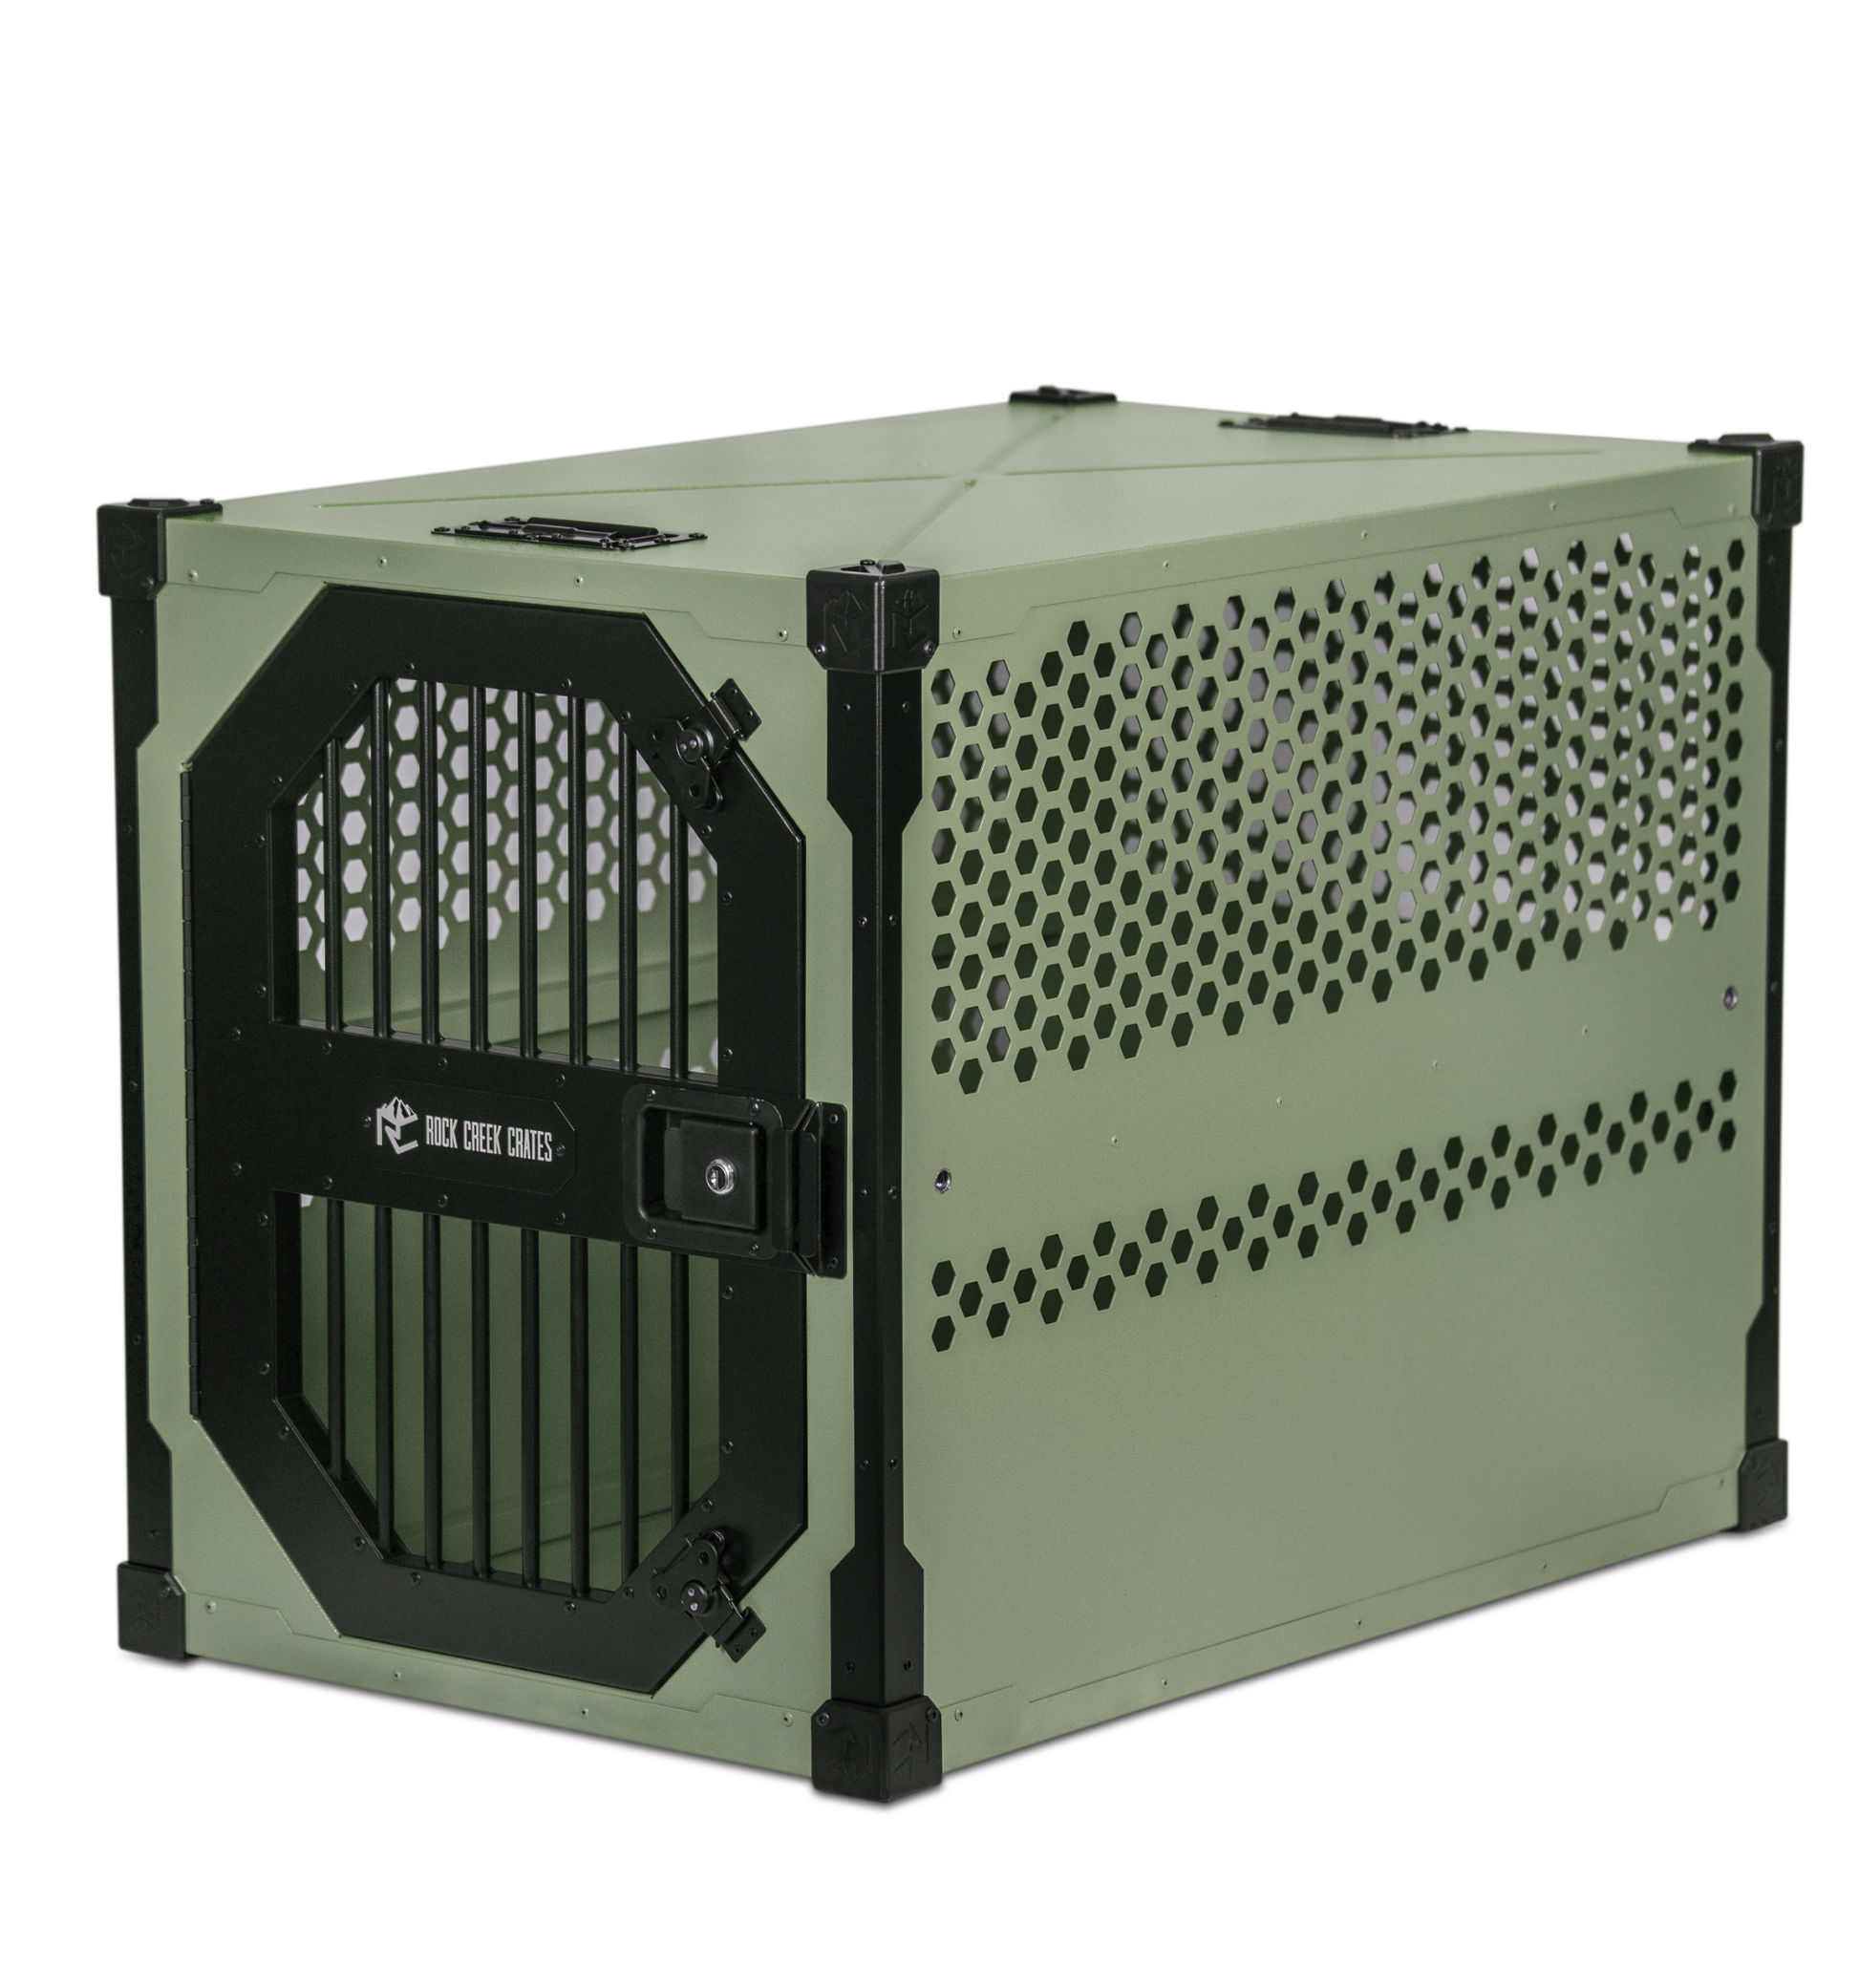 Sage Green Stationary dog crate by Rock Creek Crates